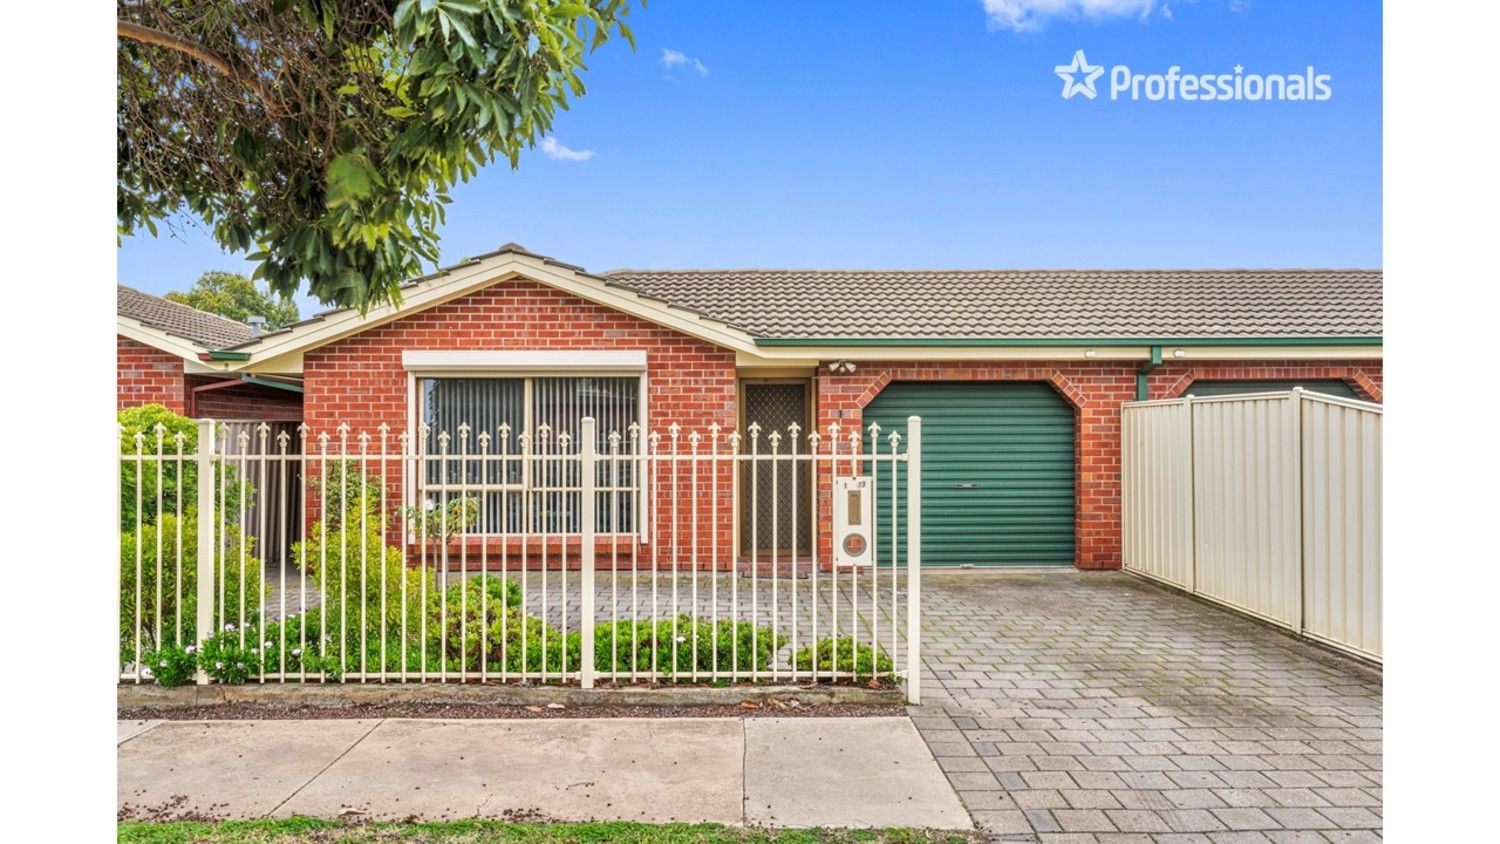 2 bedrooms Semi-Detached in 1/73 Wills Street LARGS BAY SA, 5016